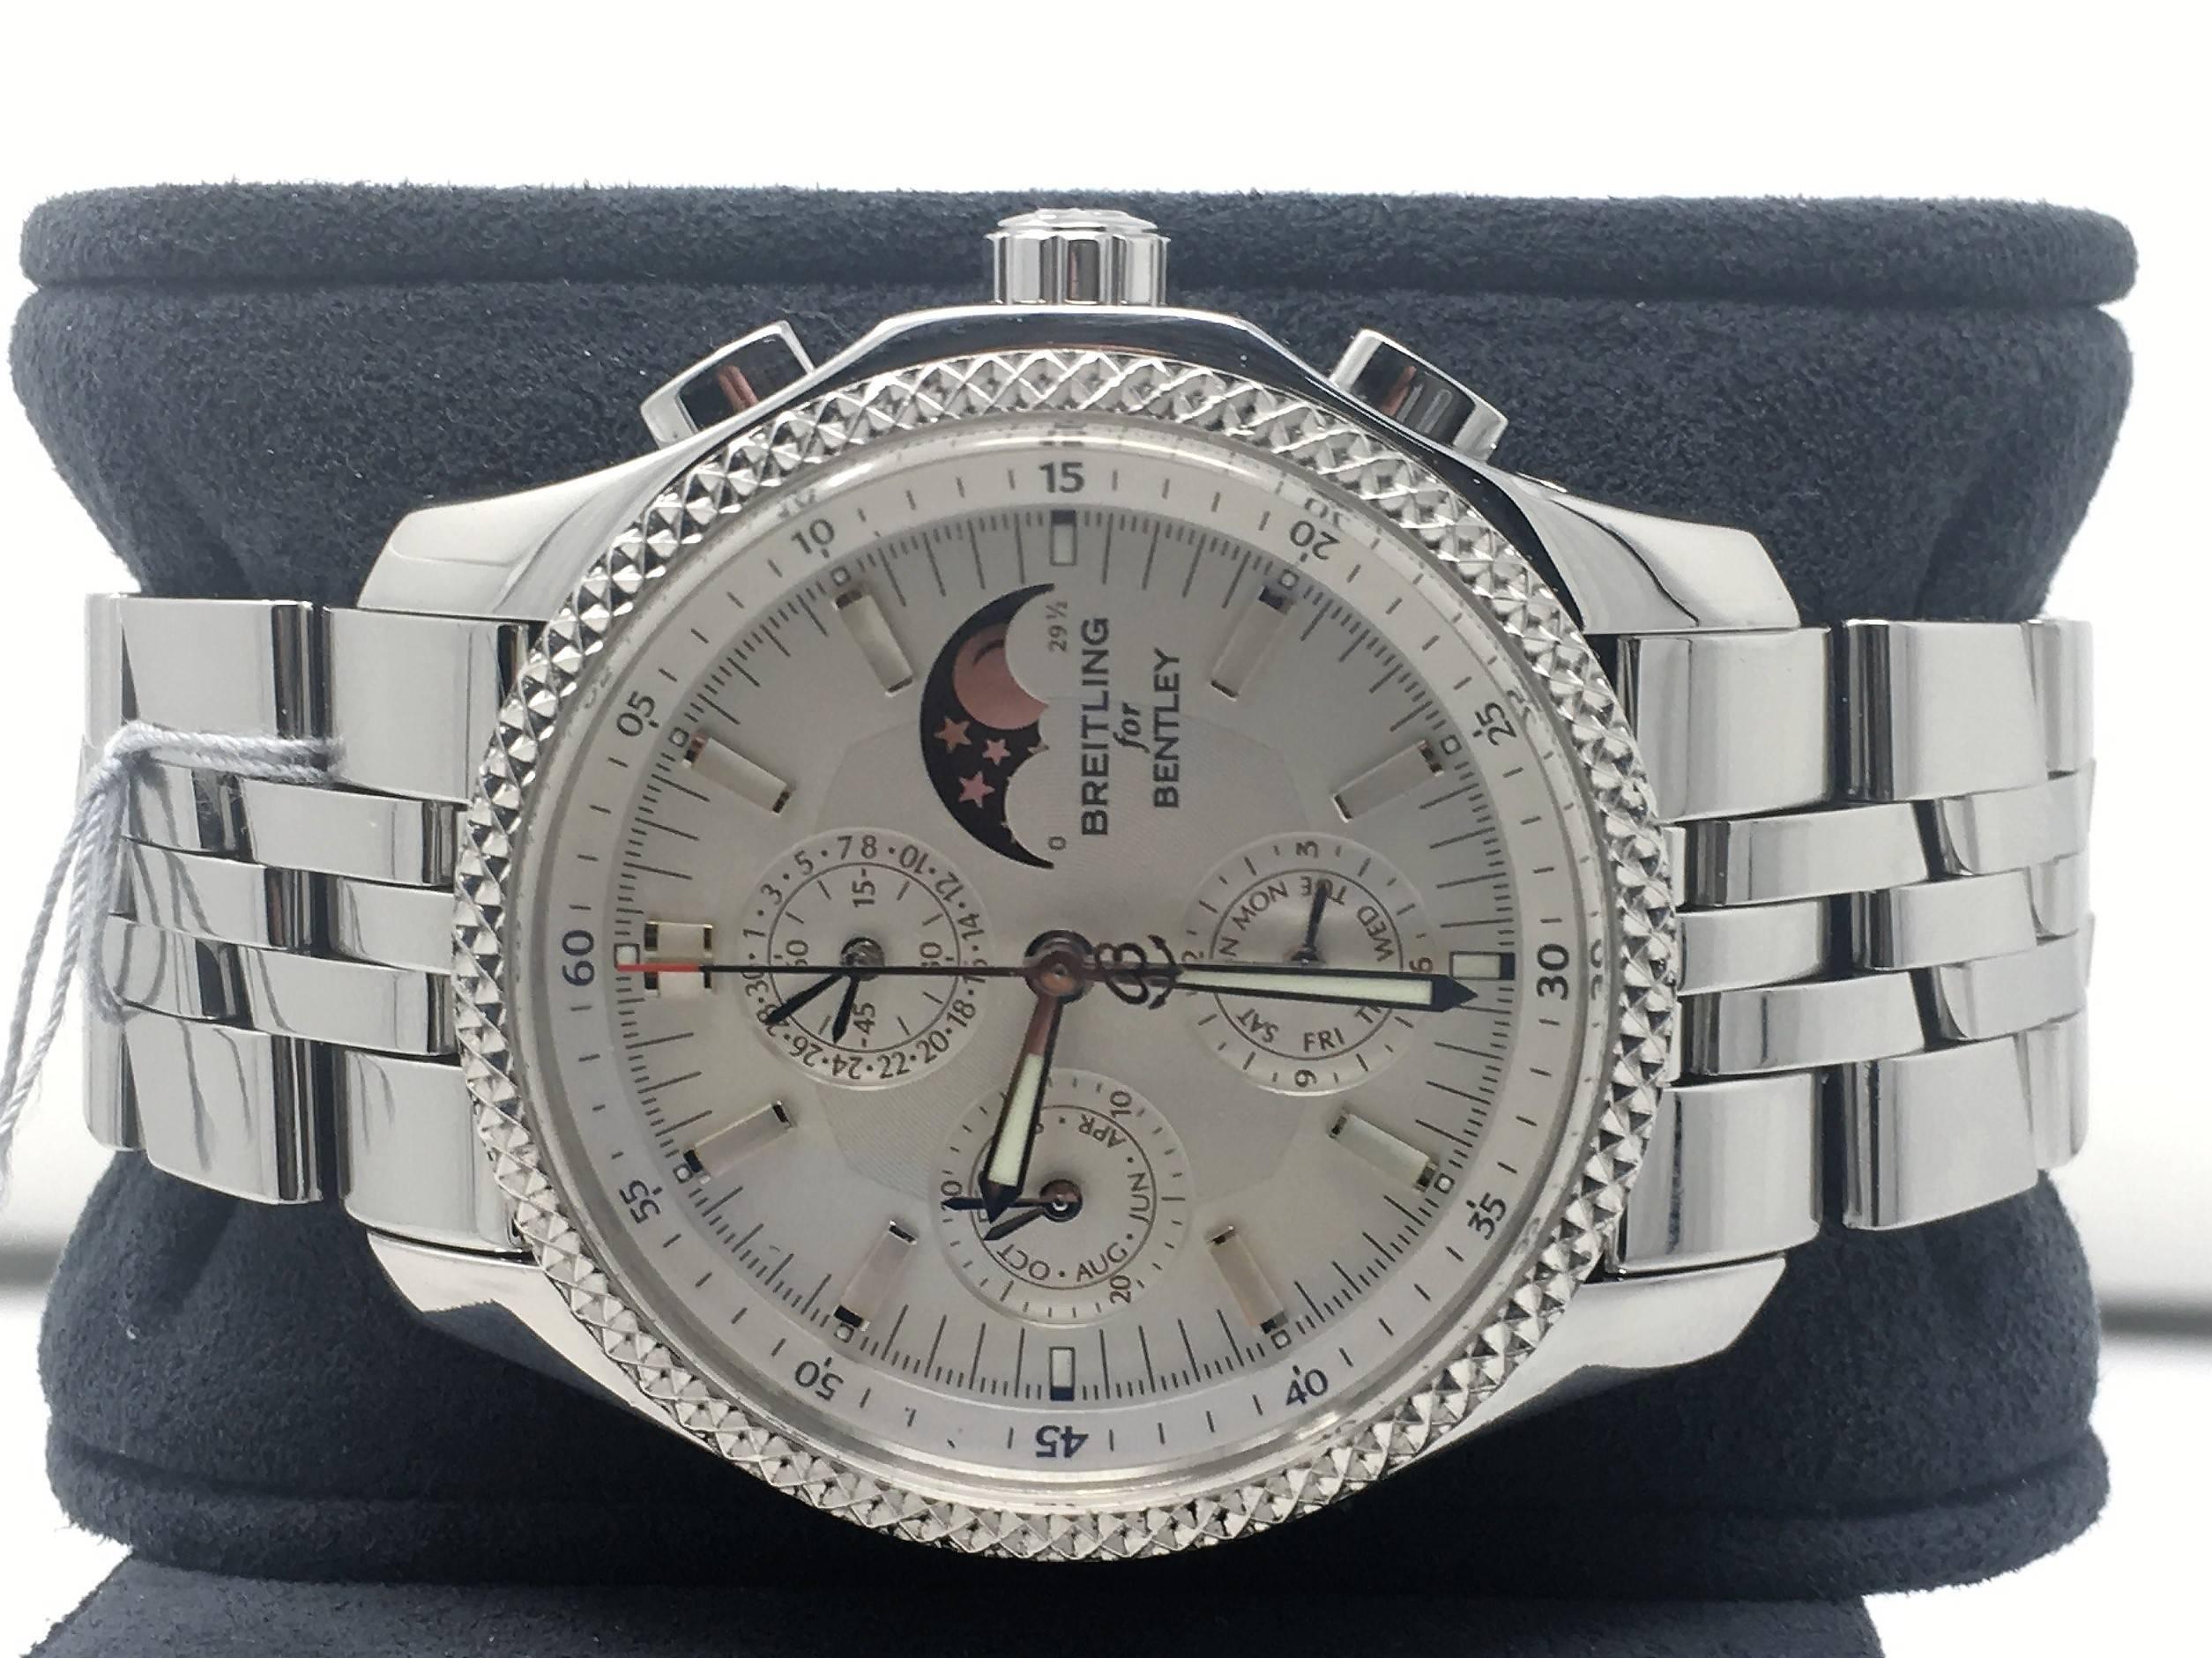 Breitling Bentley Mark VI Complications 19, 42mm stainless steel case, screw-locked crown, platinum bezel, convex sapphire crystal with glareproof treatment on both sides, Silvered Dial, selfwinding mechanical Breitling Calibre 19B movement with